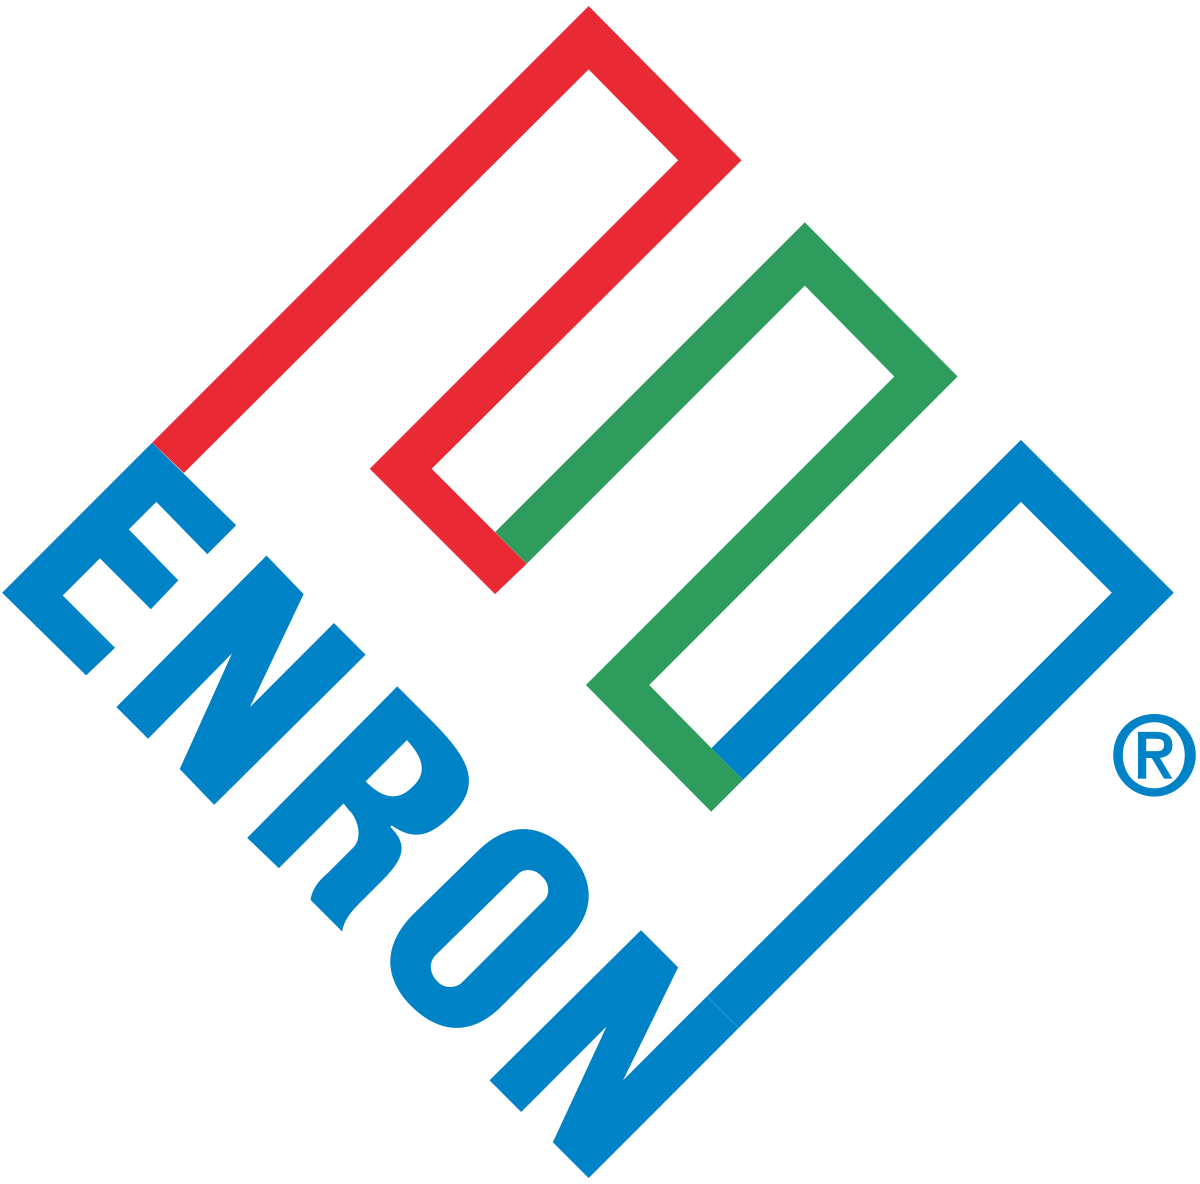 Enrons collapse